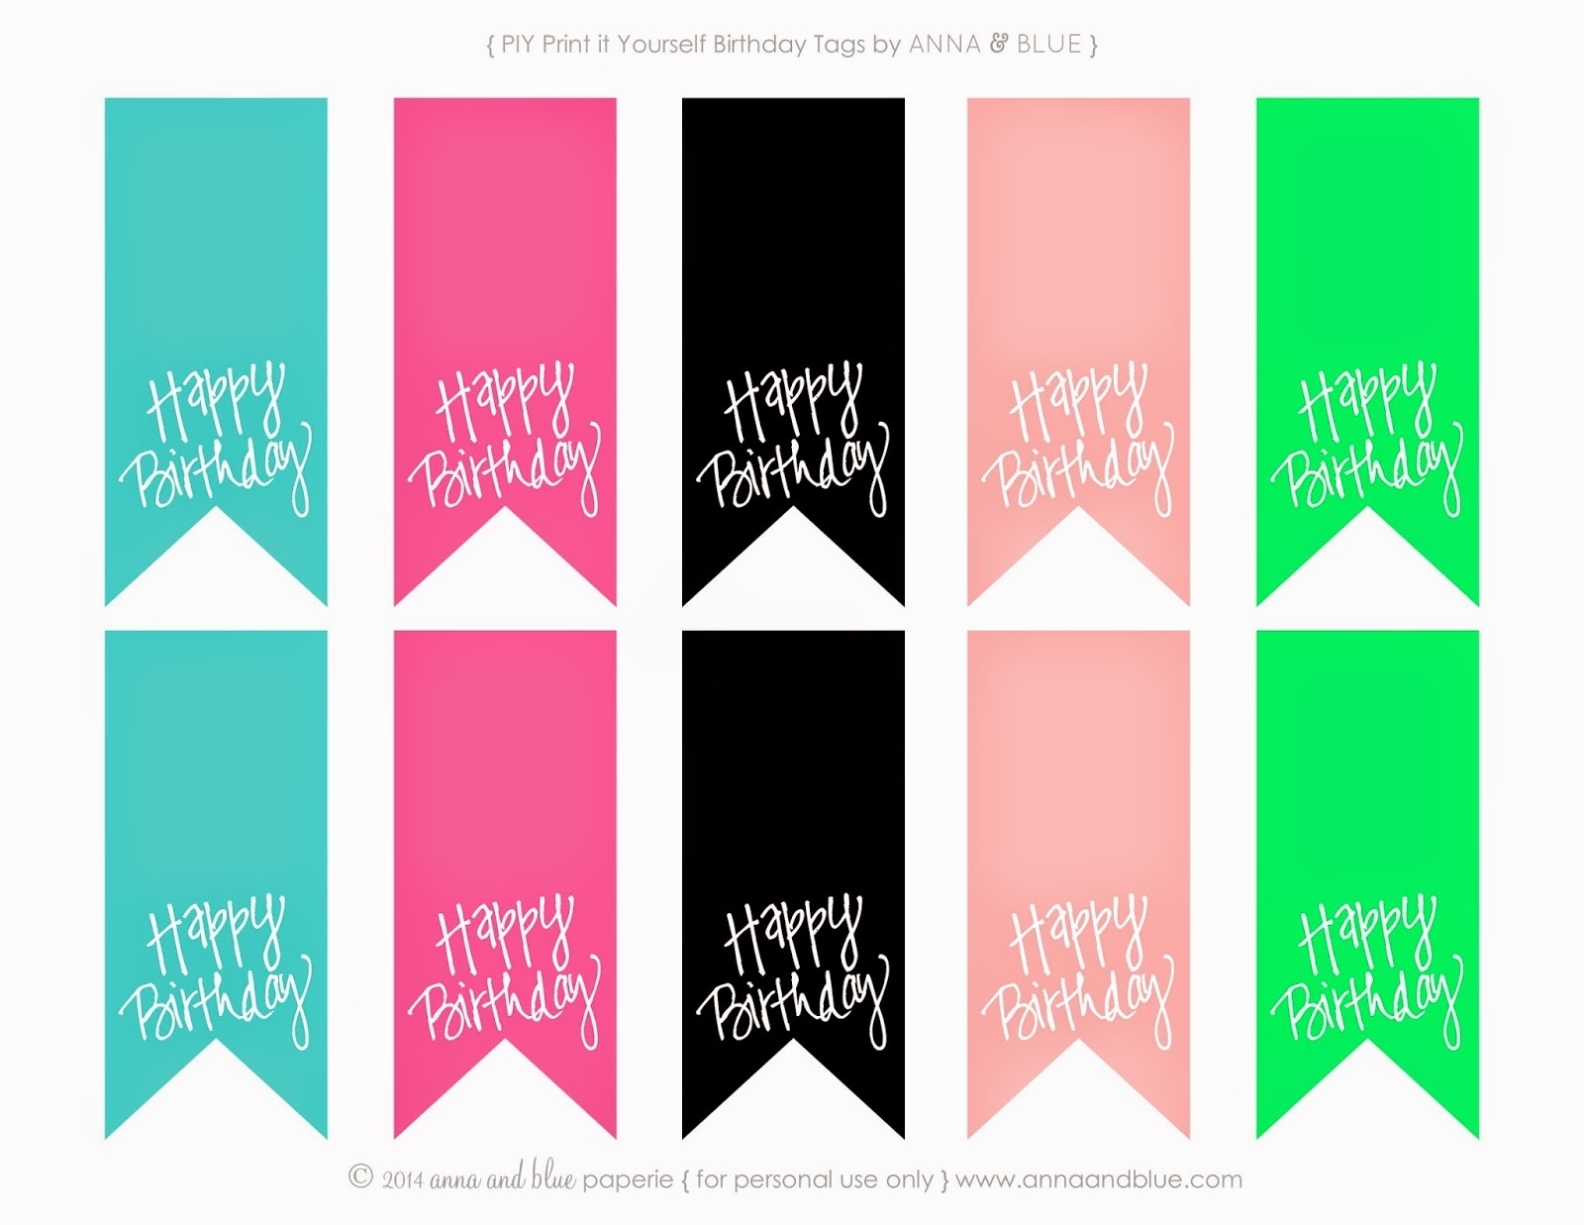 Anna And Blue Paperie: Free Printable Happy Birthday Gift Tags In 5 Colors Regarding Birthday Labels Template Free